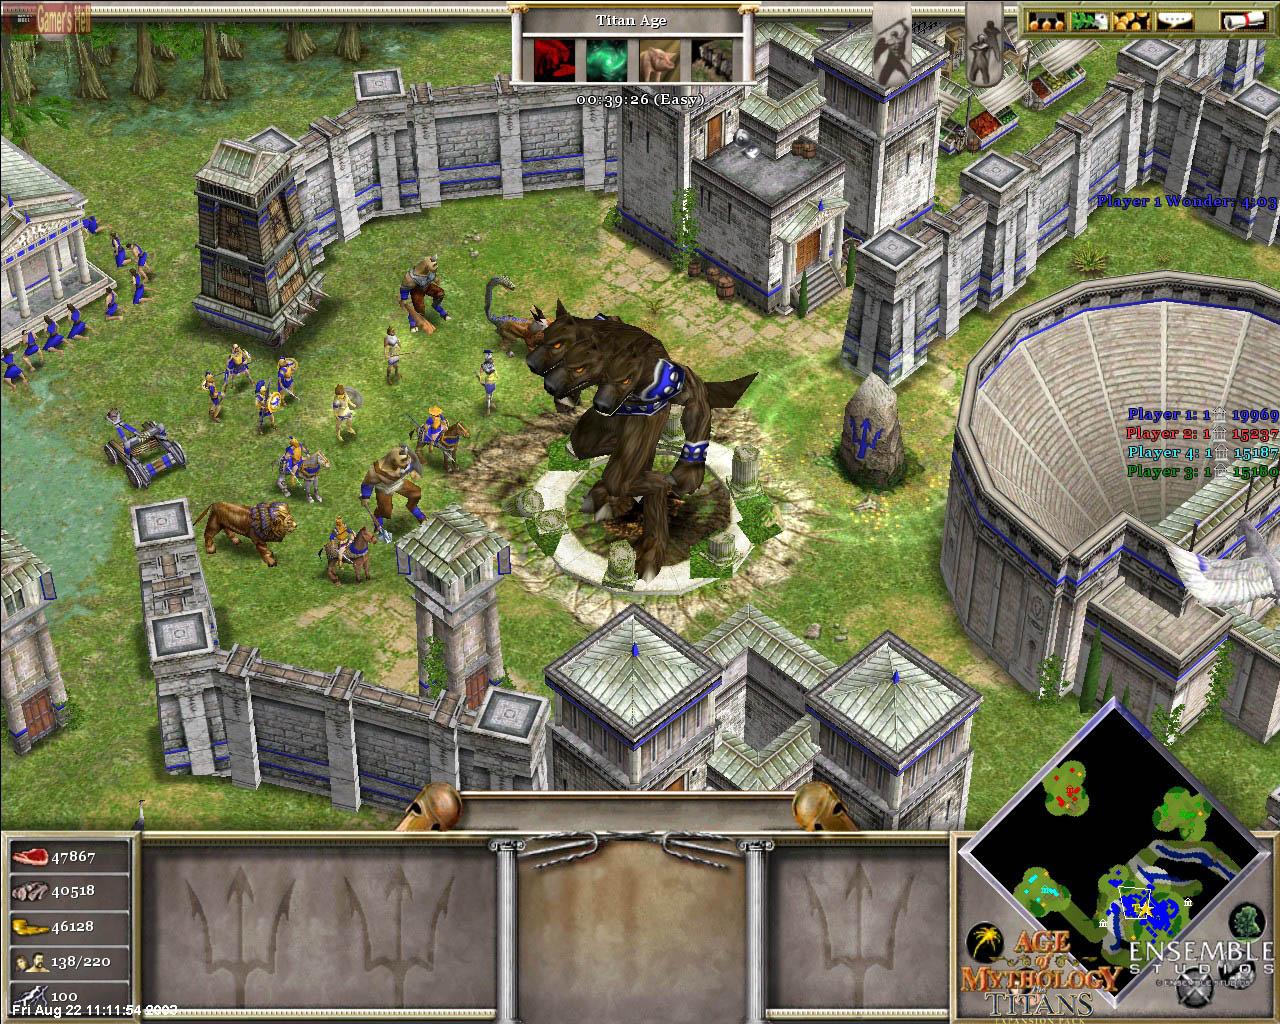 High Resolution Wallpaper | Age Of Mythology: The Titans 1280x1024 px